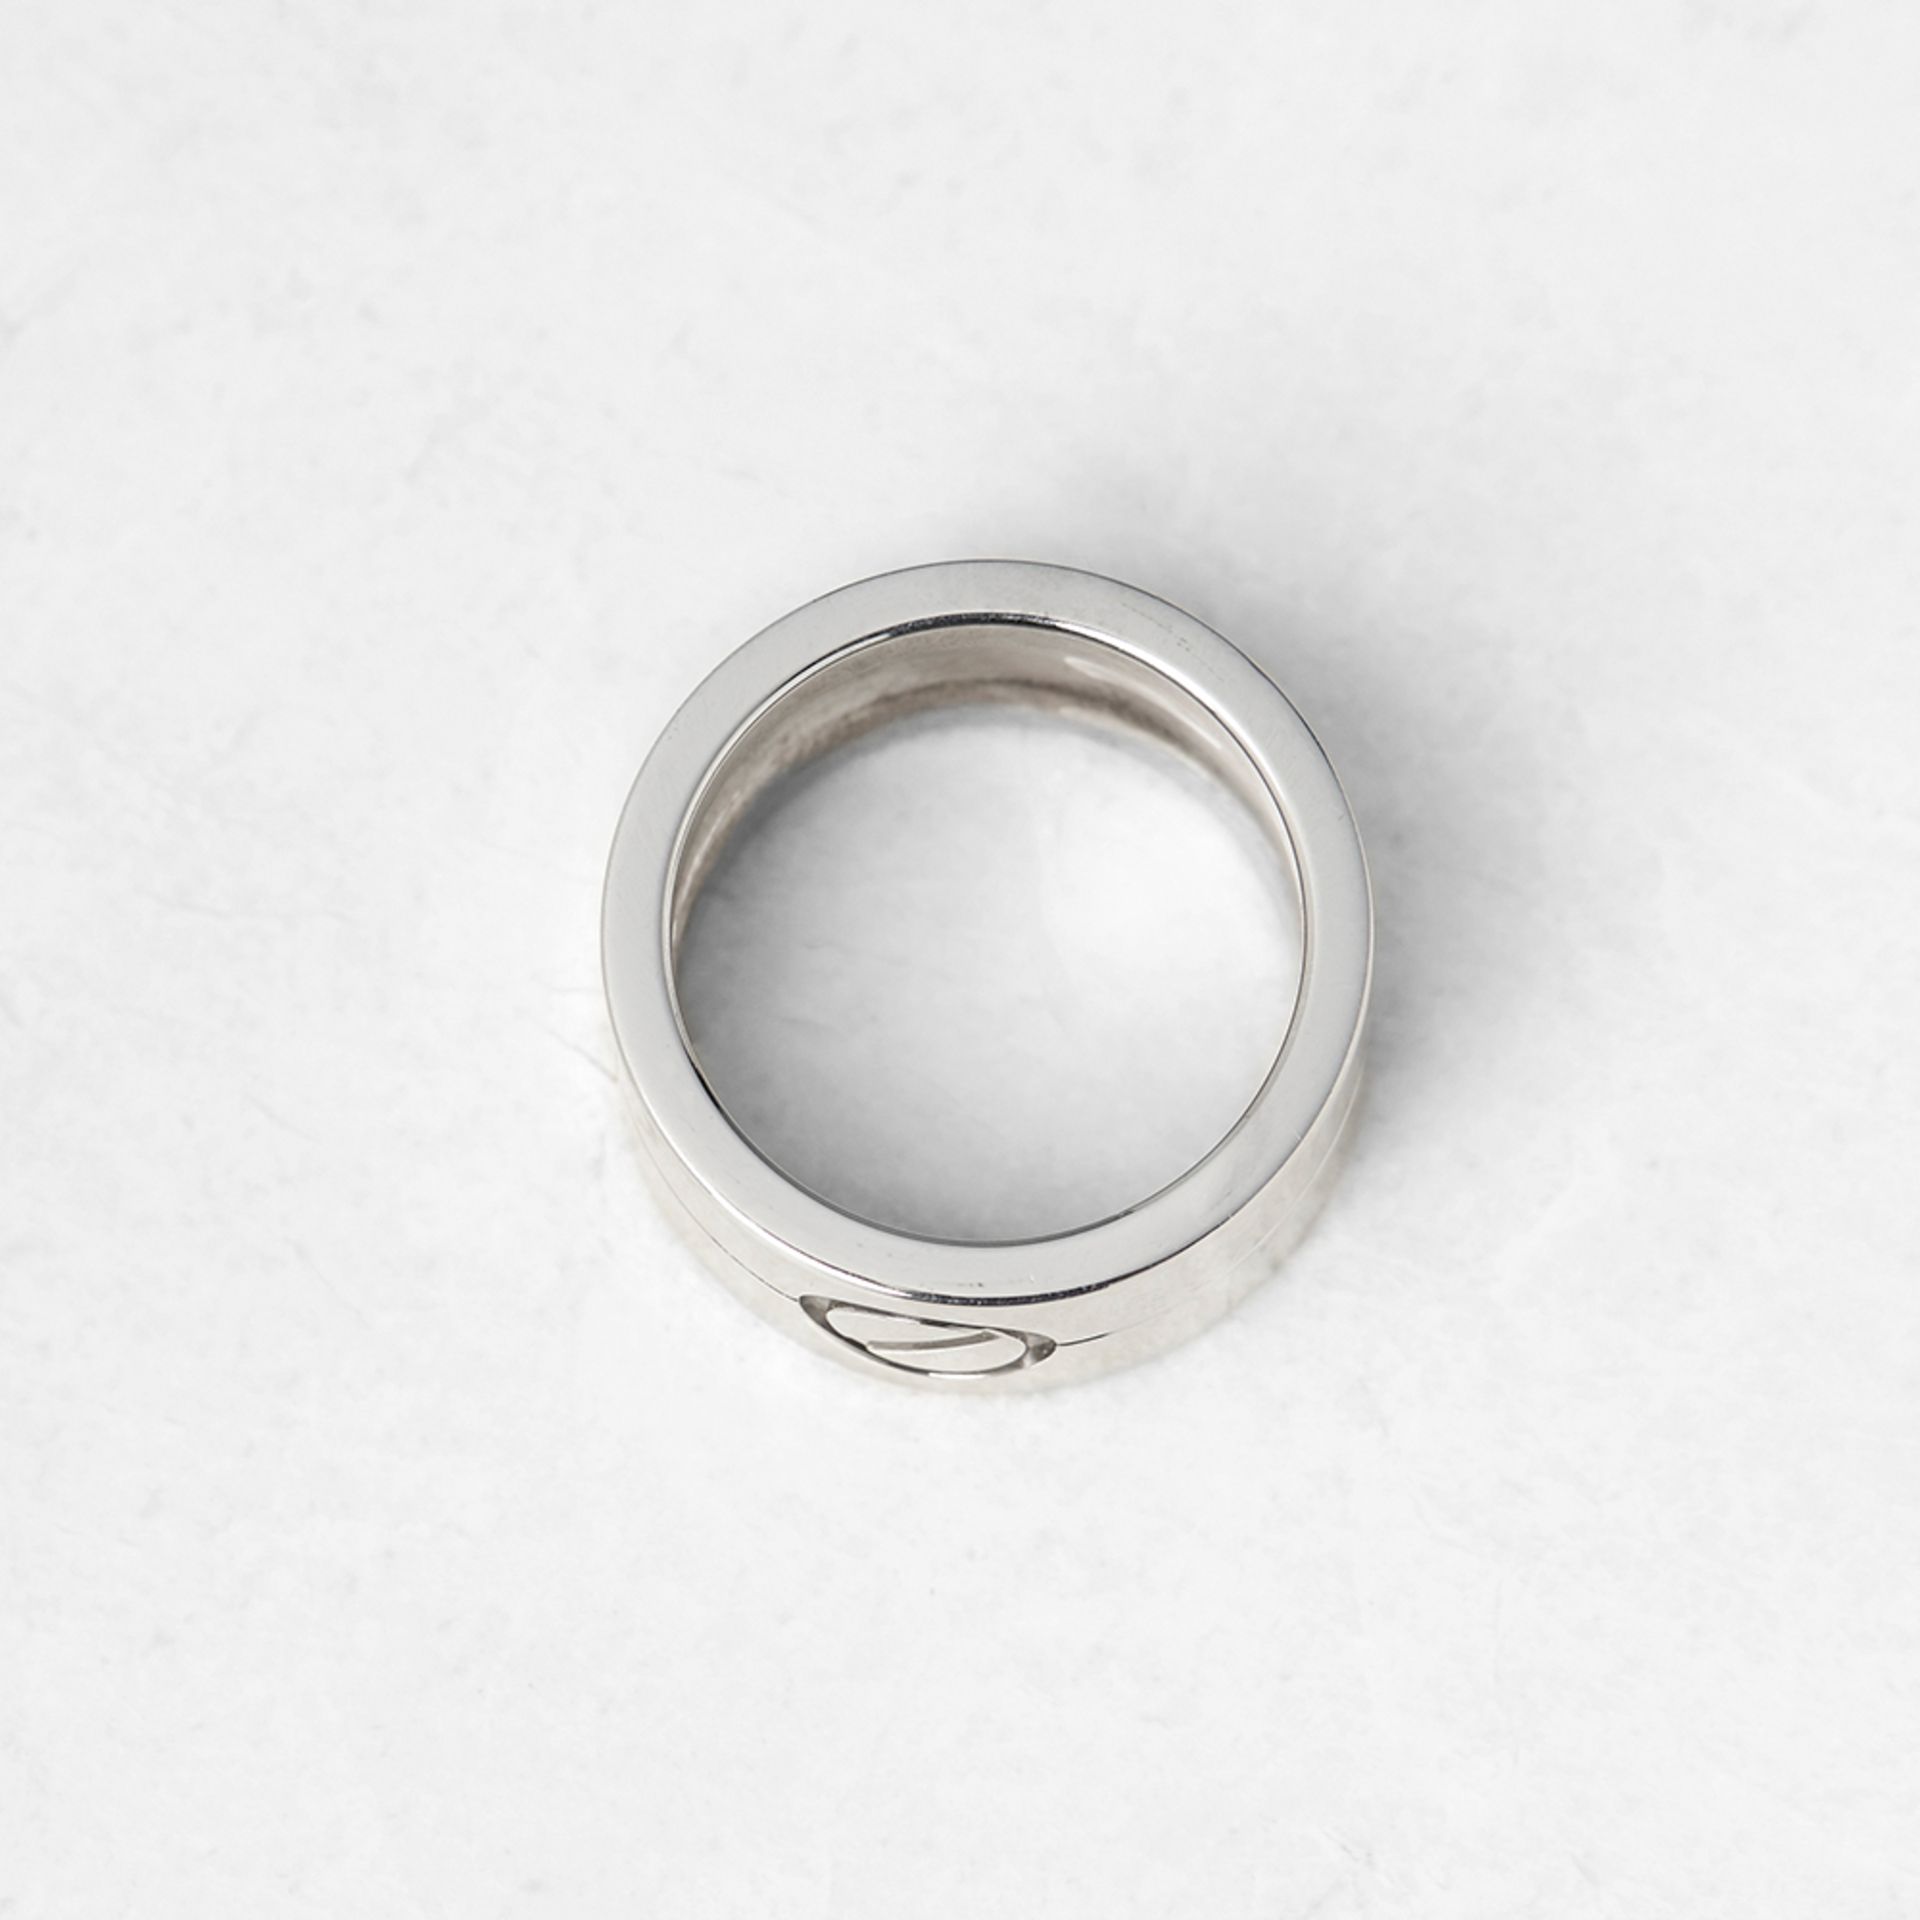 Cartier 18k White Gold High Love Ring - Image 5 of 8